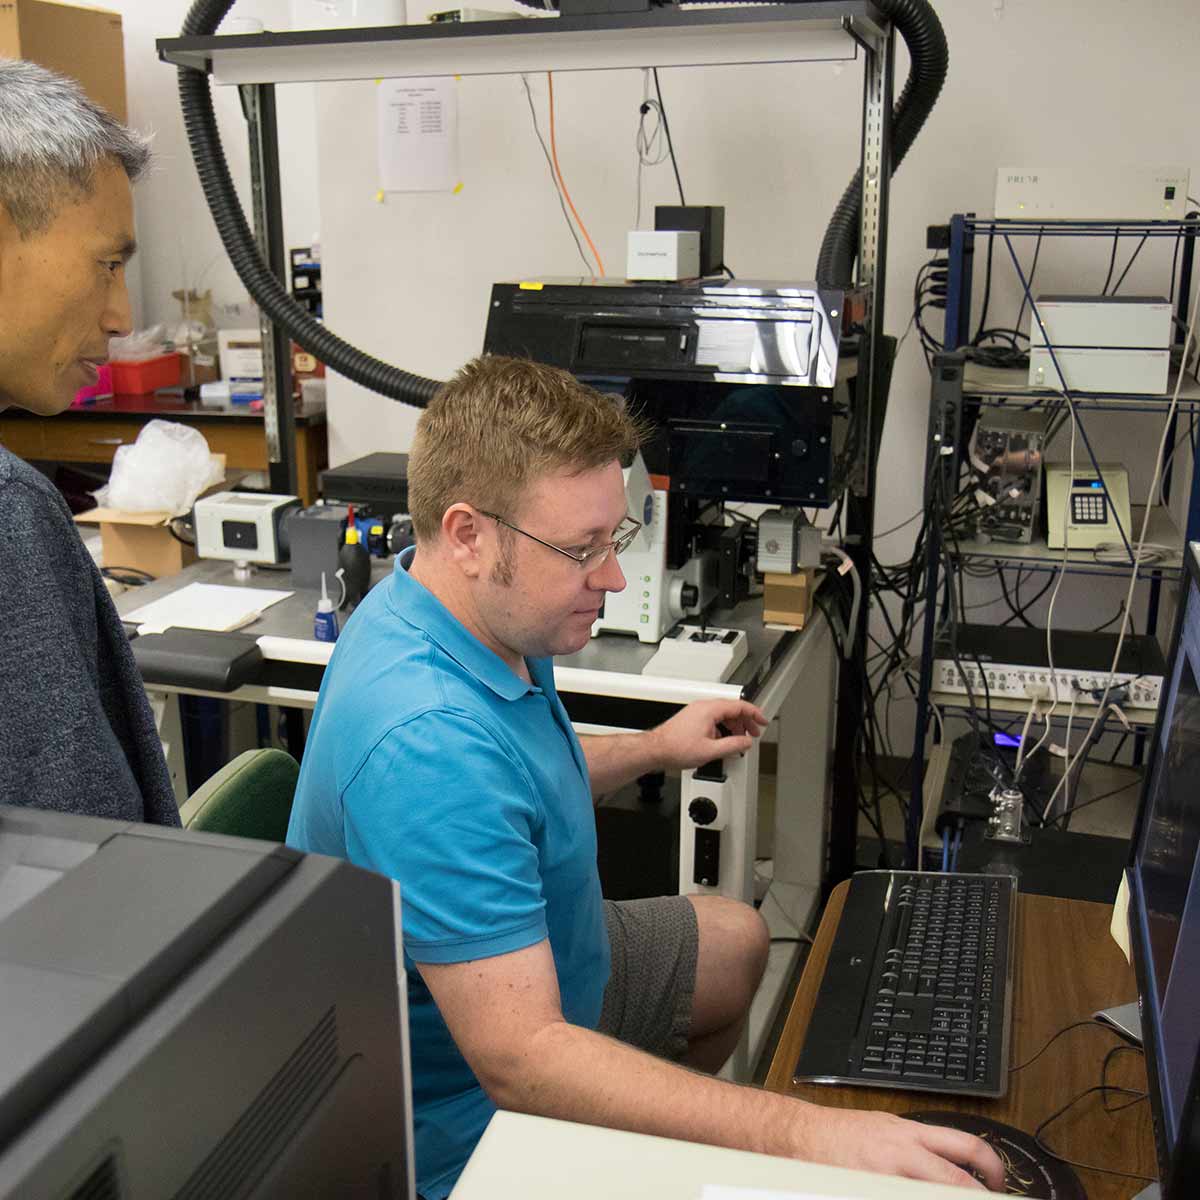 A biology student conducts research on a computer in a lab while Dr. Kyoungtae Kim observes.